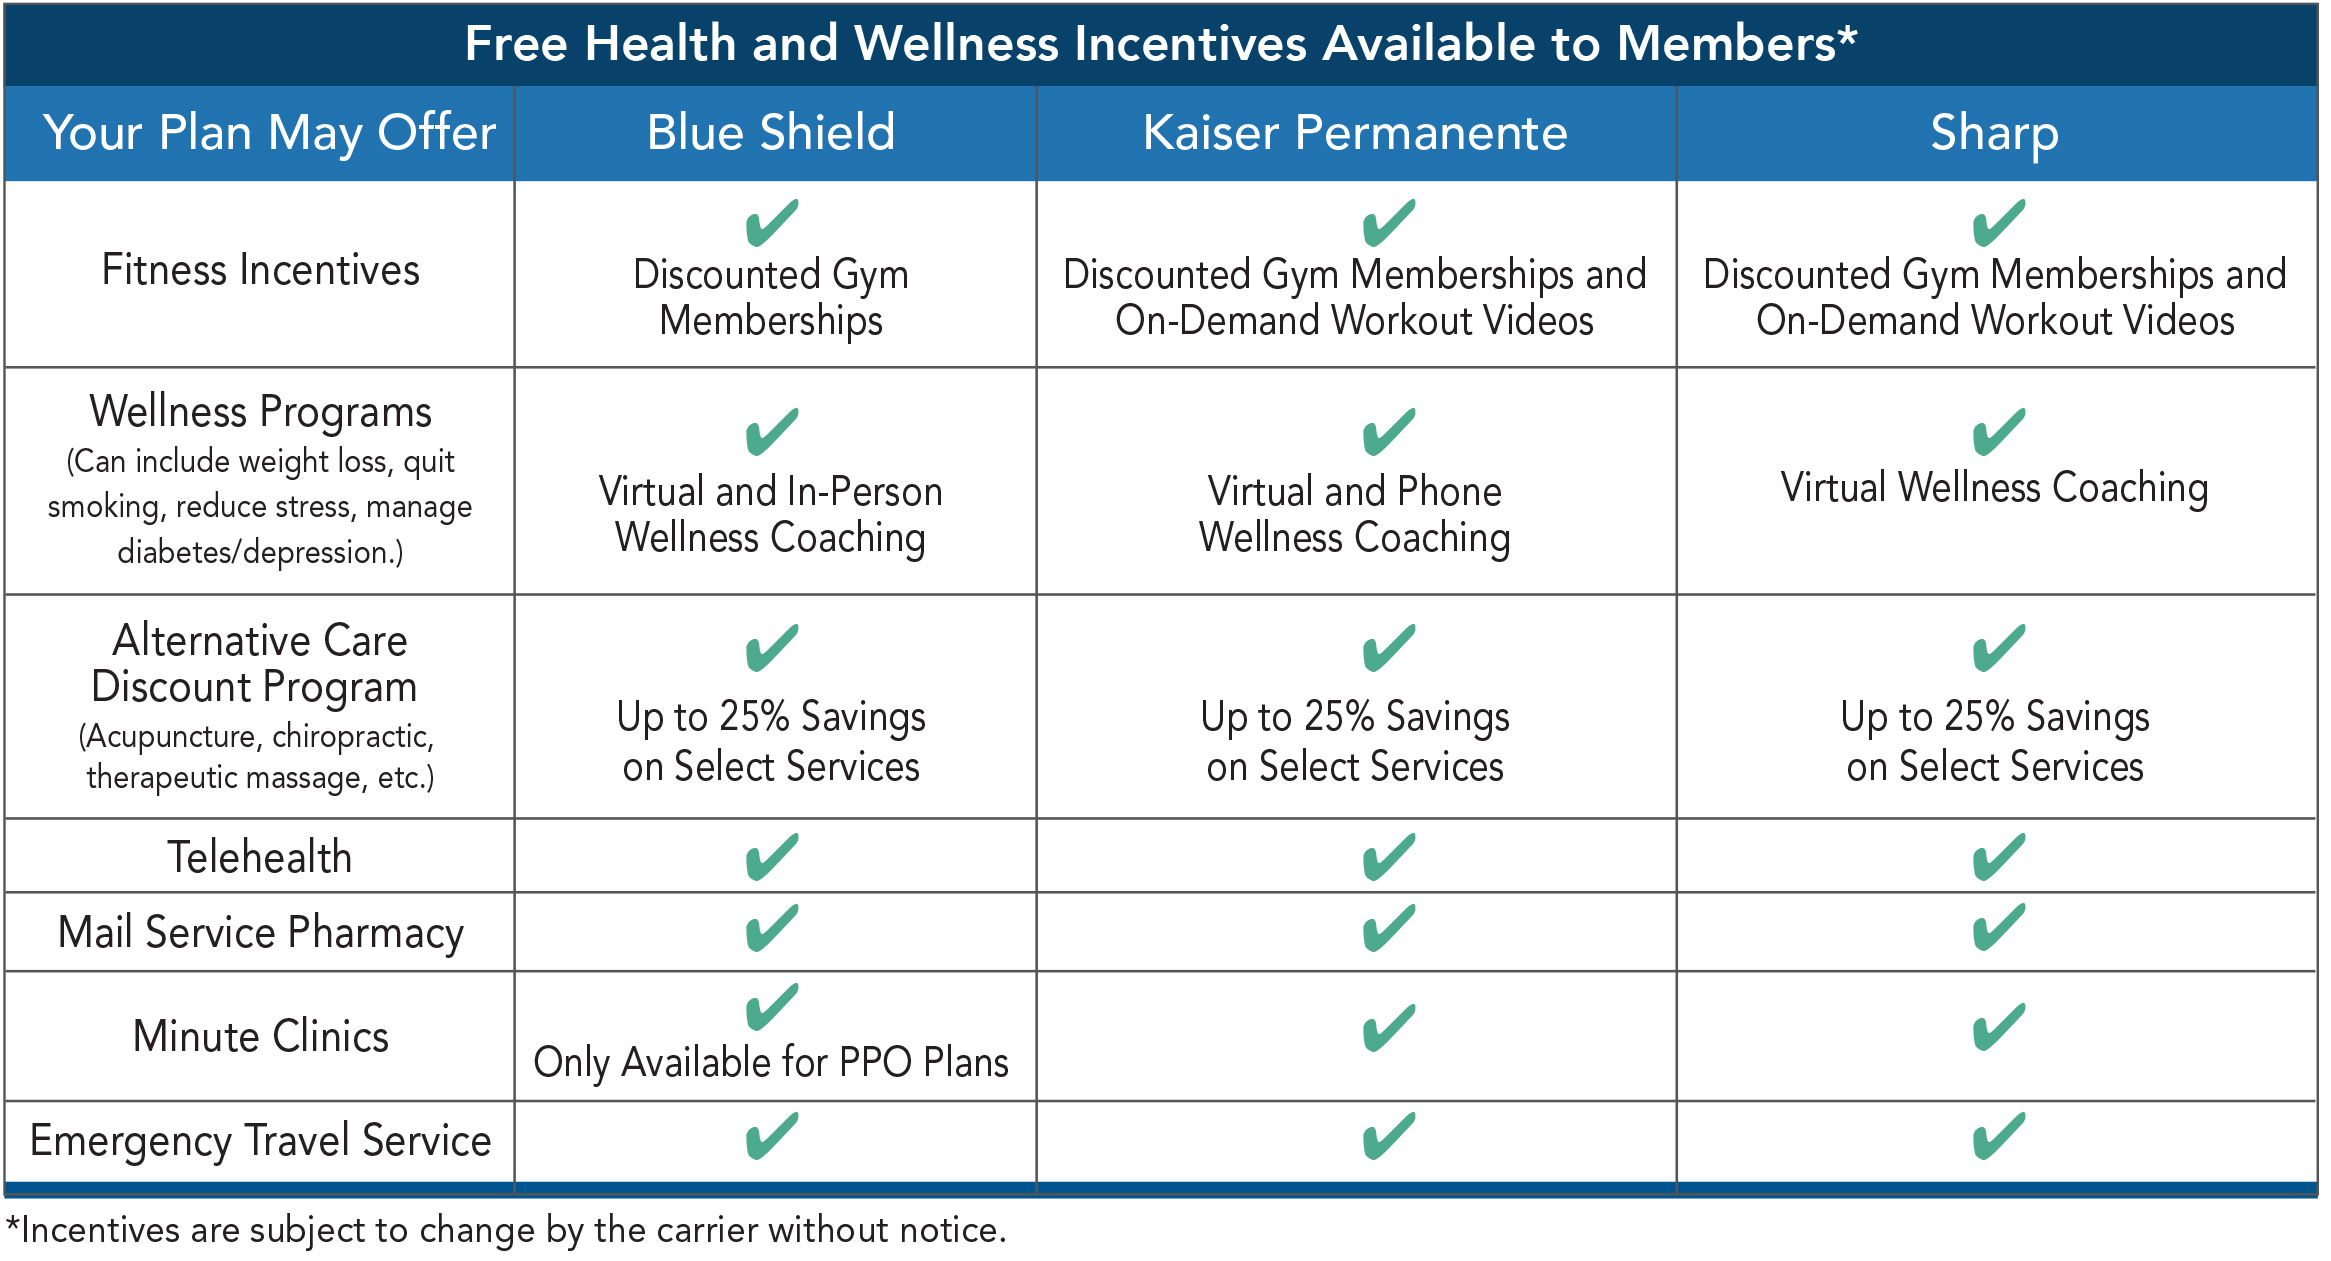 CCSB Free Health and Wellness Incentives for Members